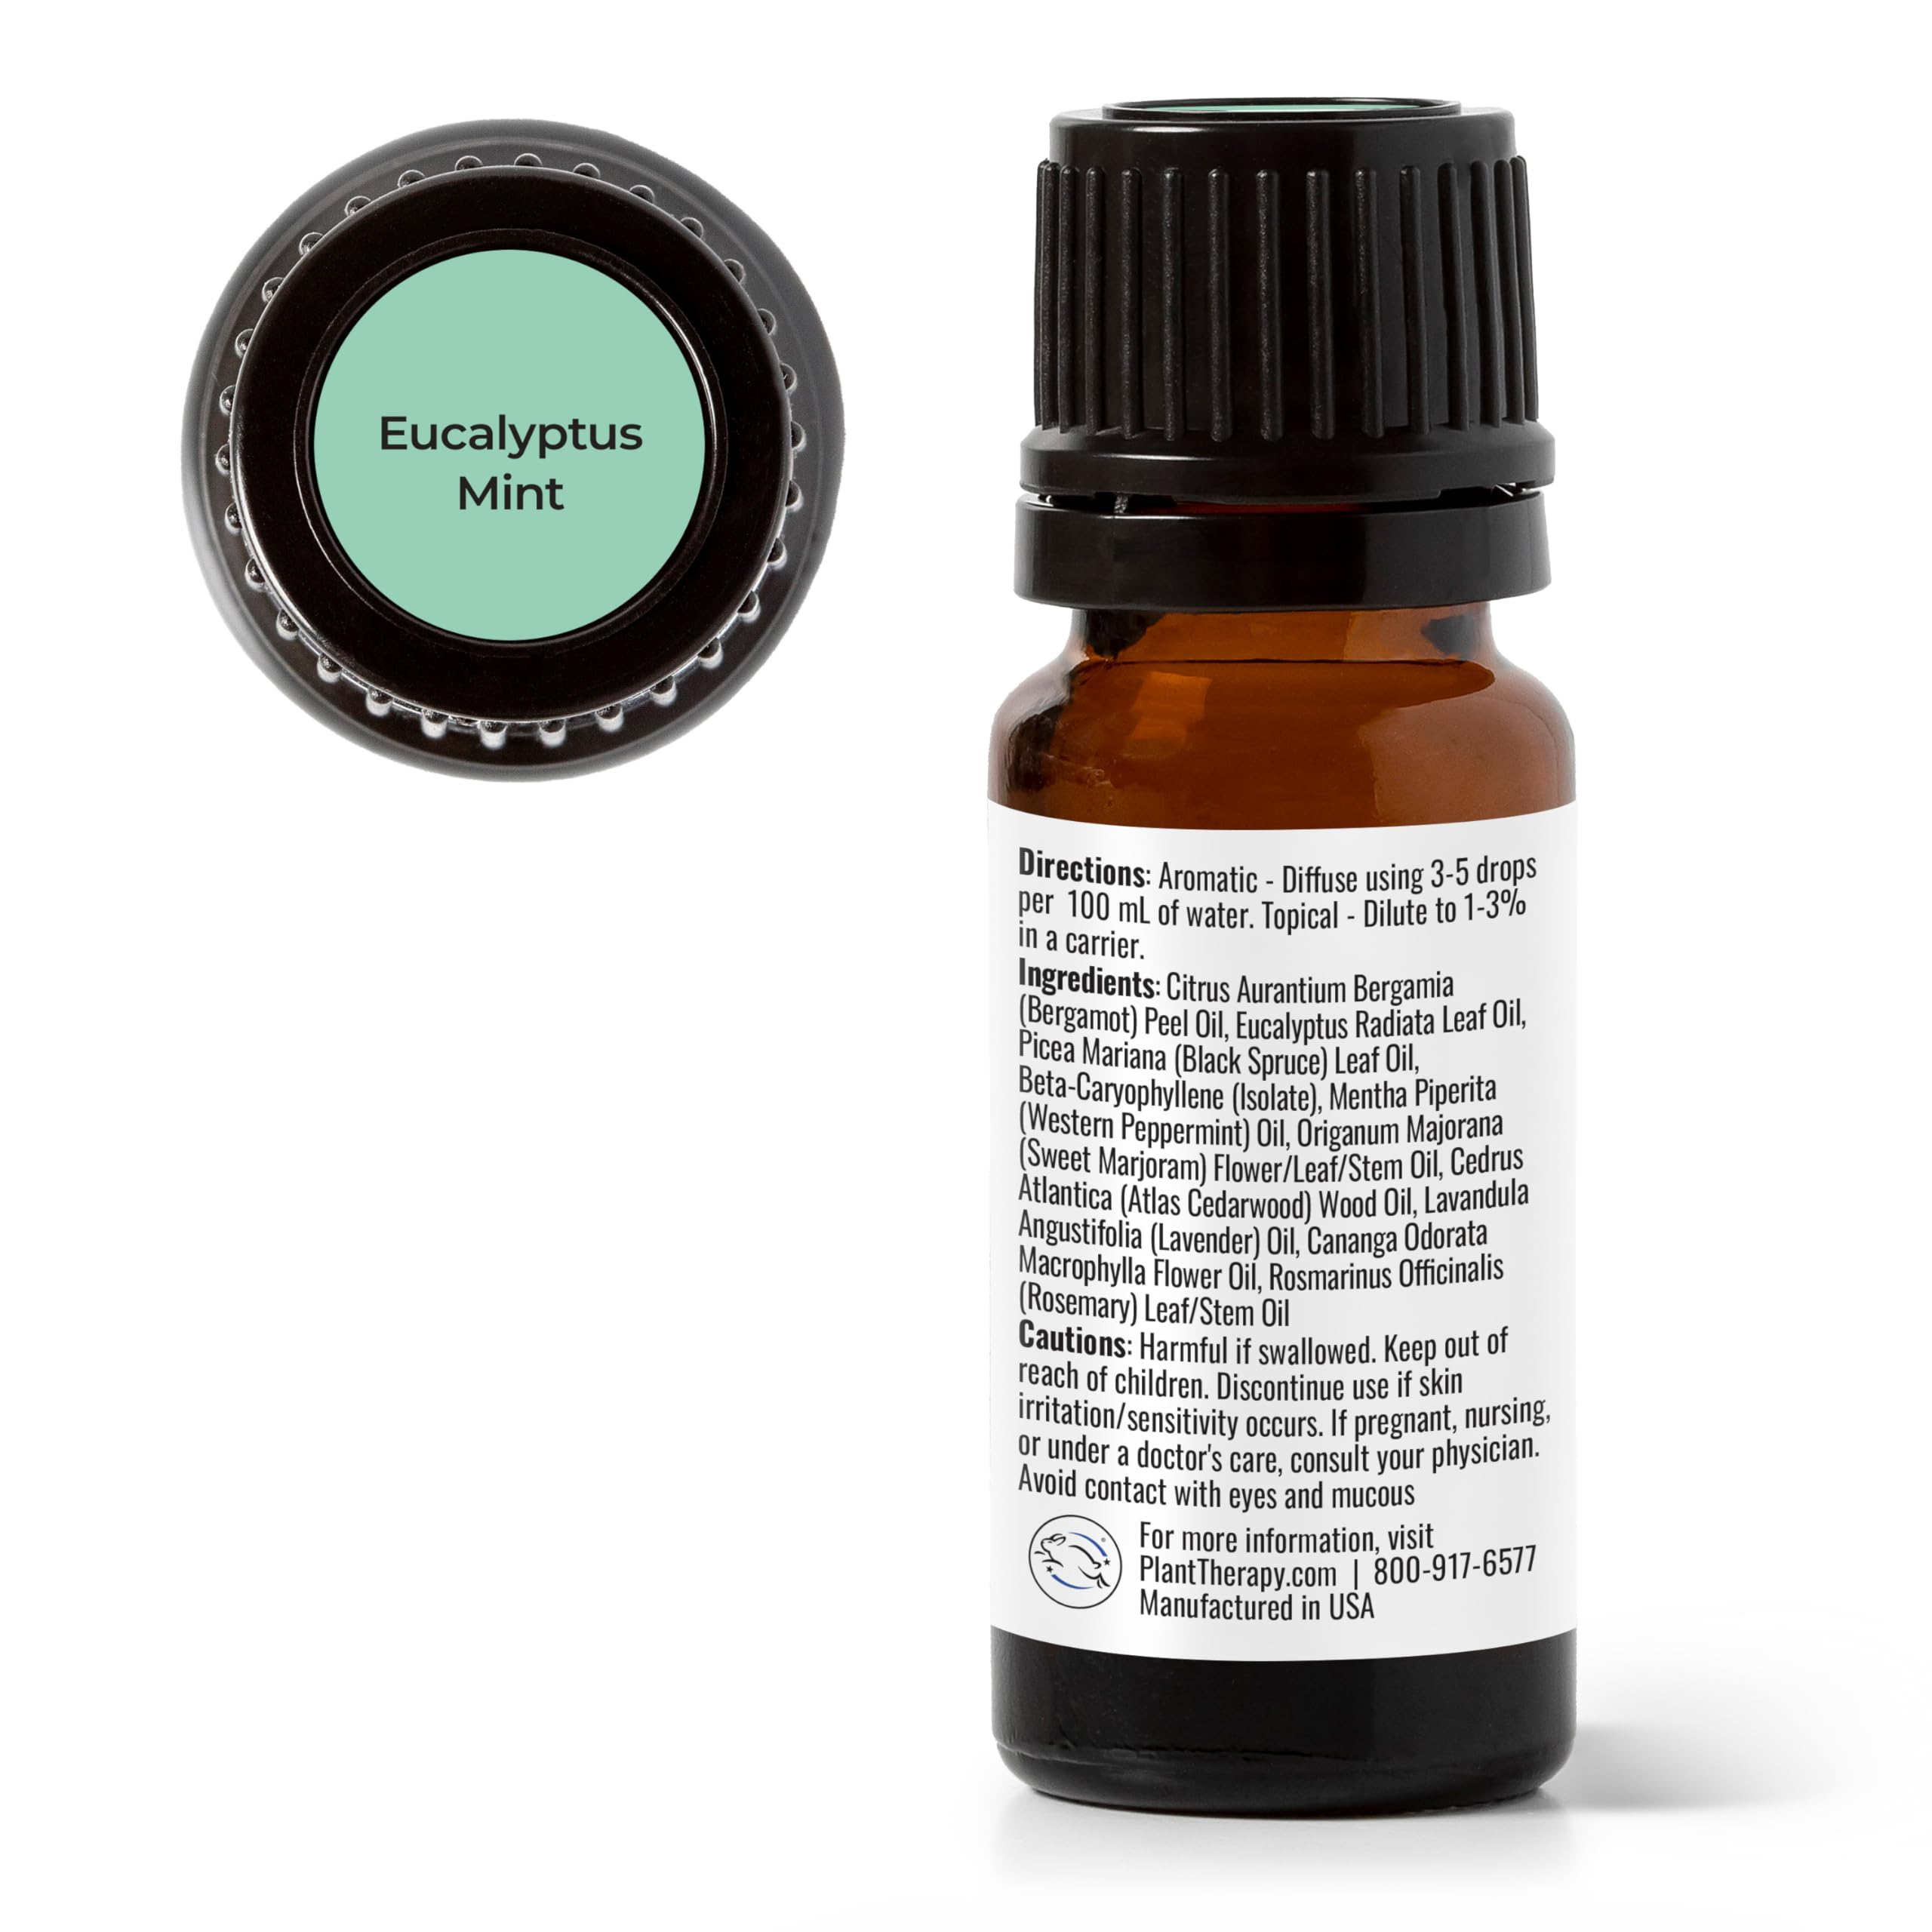 Plant Therapy Eucalyptus Mint Essential Oil Blend 10 mL (1/3 oz) Invigorating, Breathe Easier Aromatherapy Blend for Diffusers, Home, Shower Aromatherapy, 100% Pure, Undiluted, Therapeutic Grade